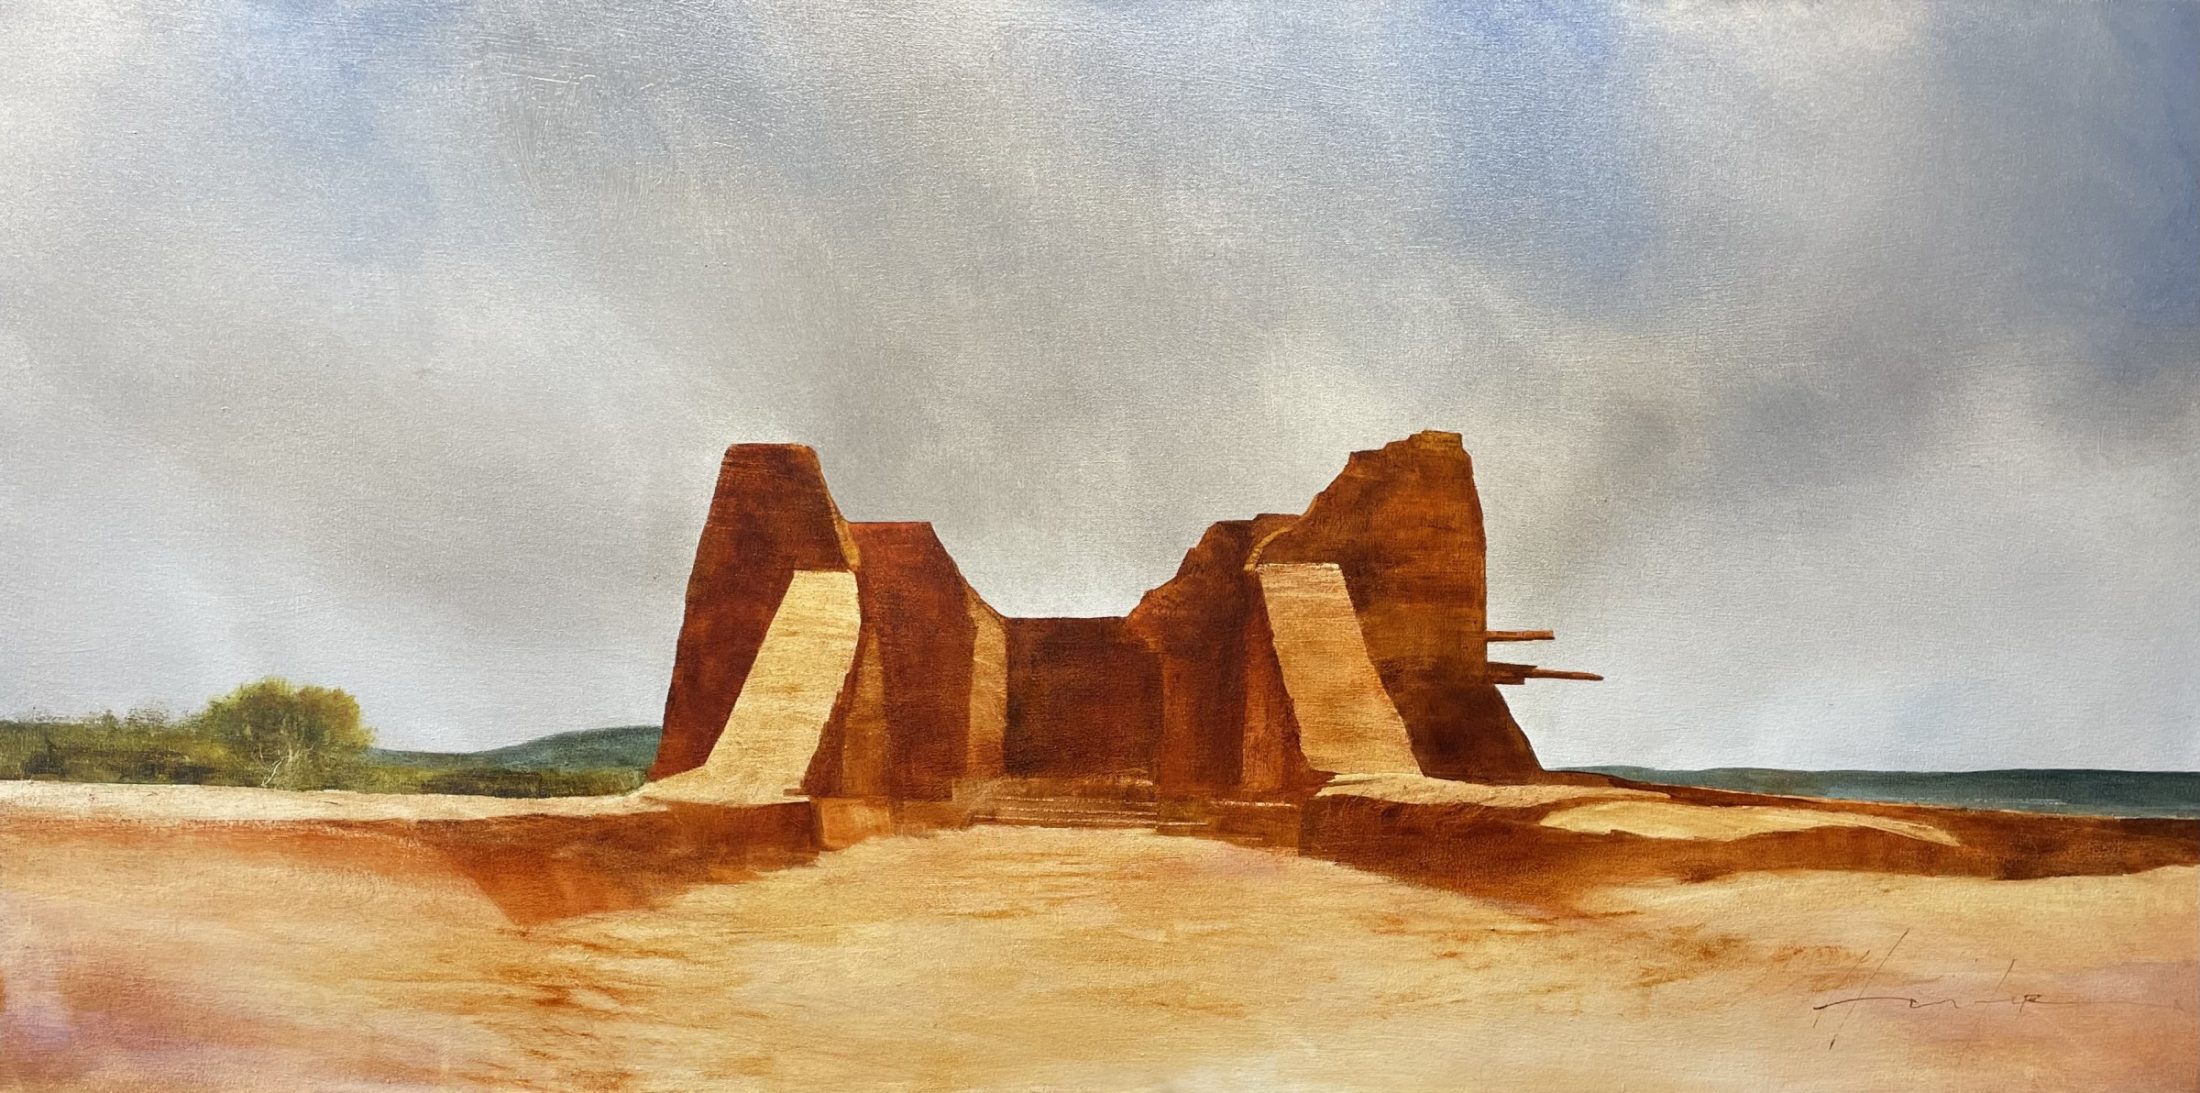 Oil painting of Pecos ruins by Charlie Hunter